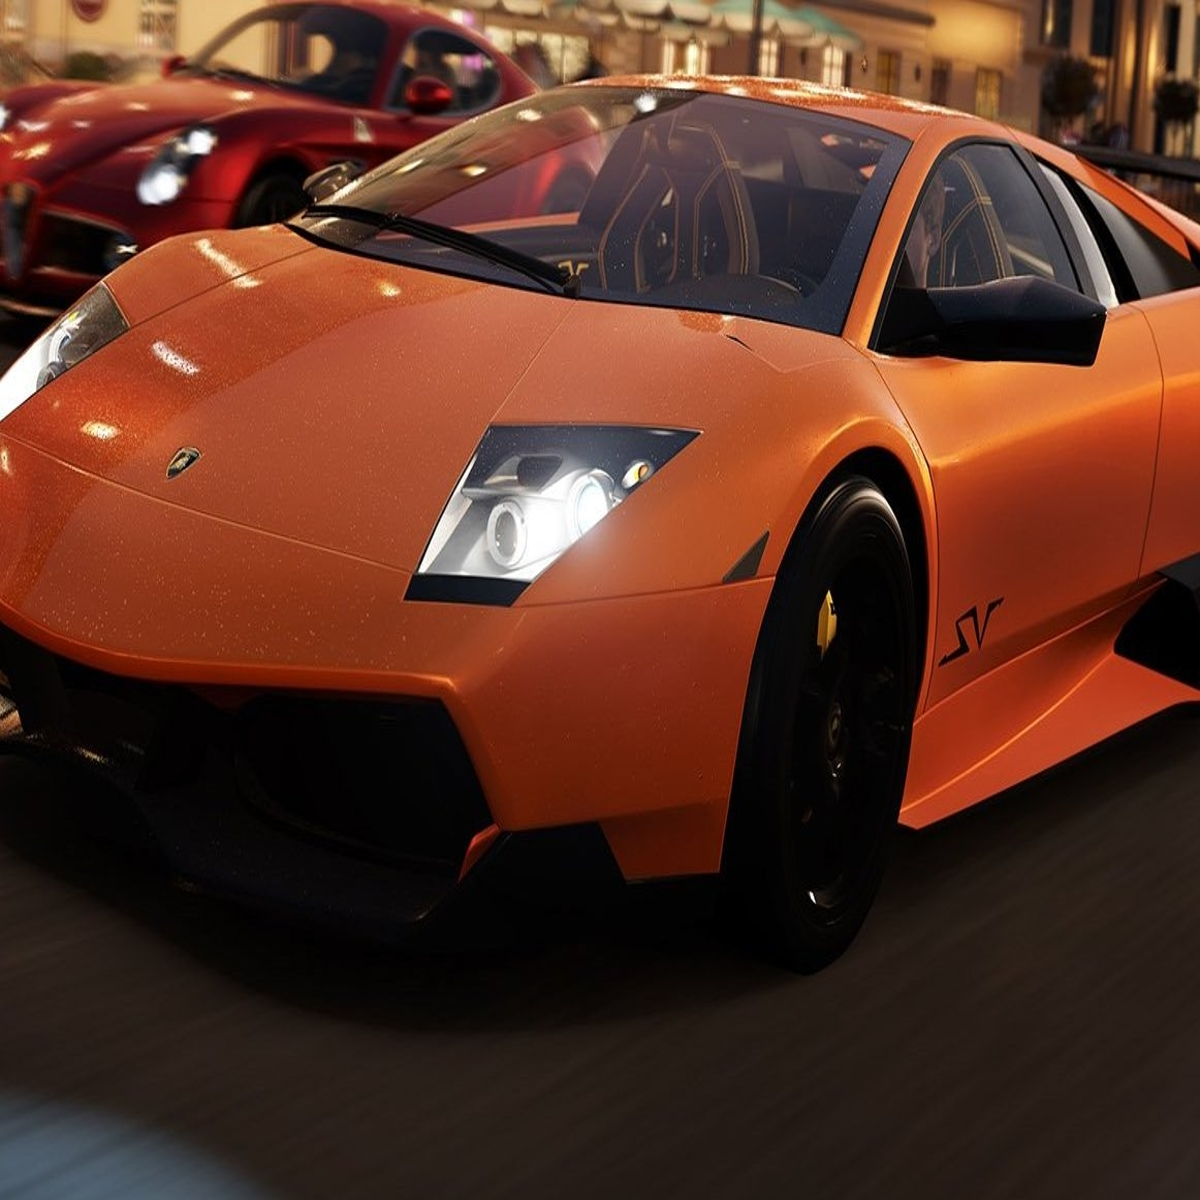 The Verge - Here's a fresh look at the next-gen Forza Motorsport